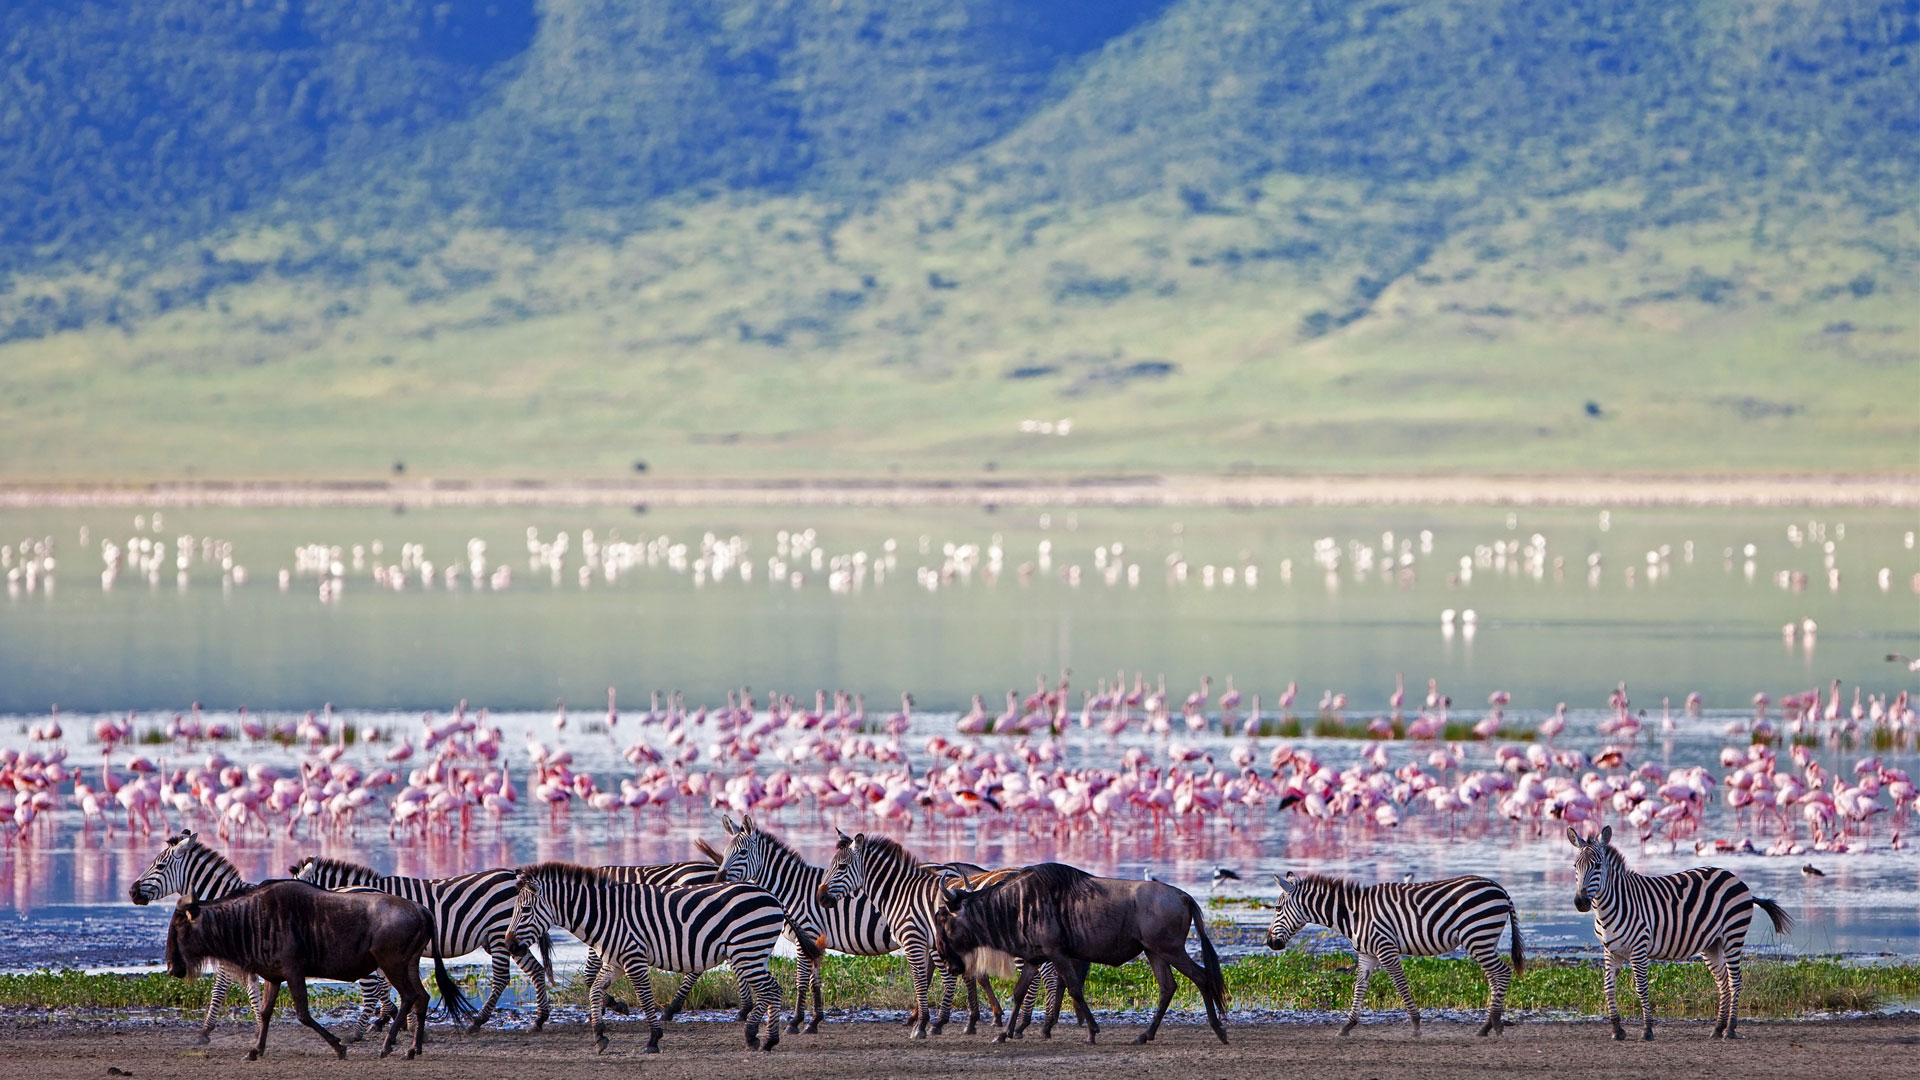 Tanzania National Parks in the North